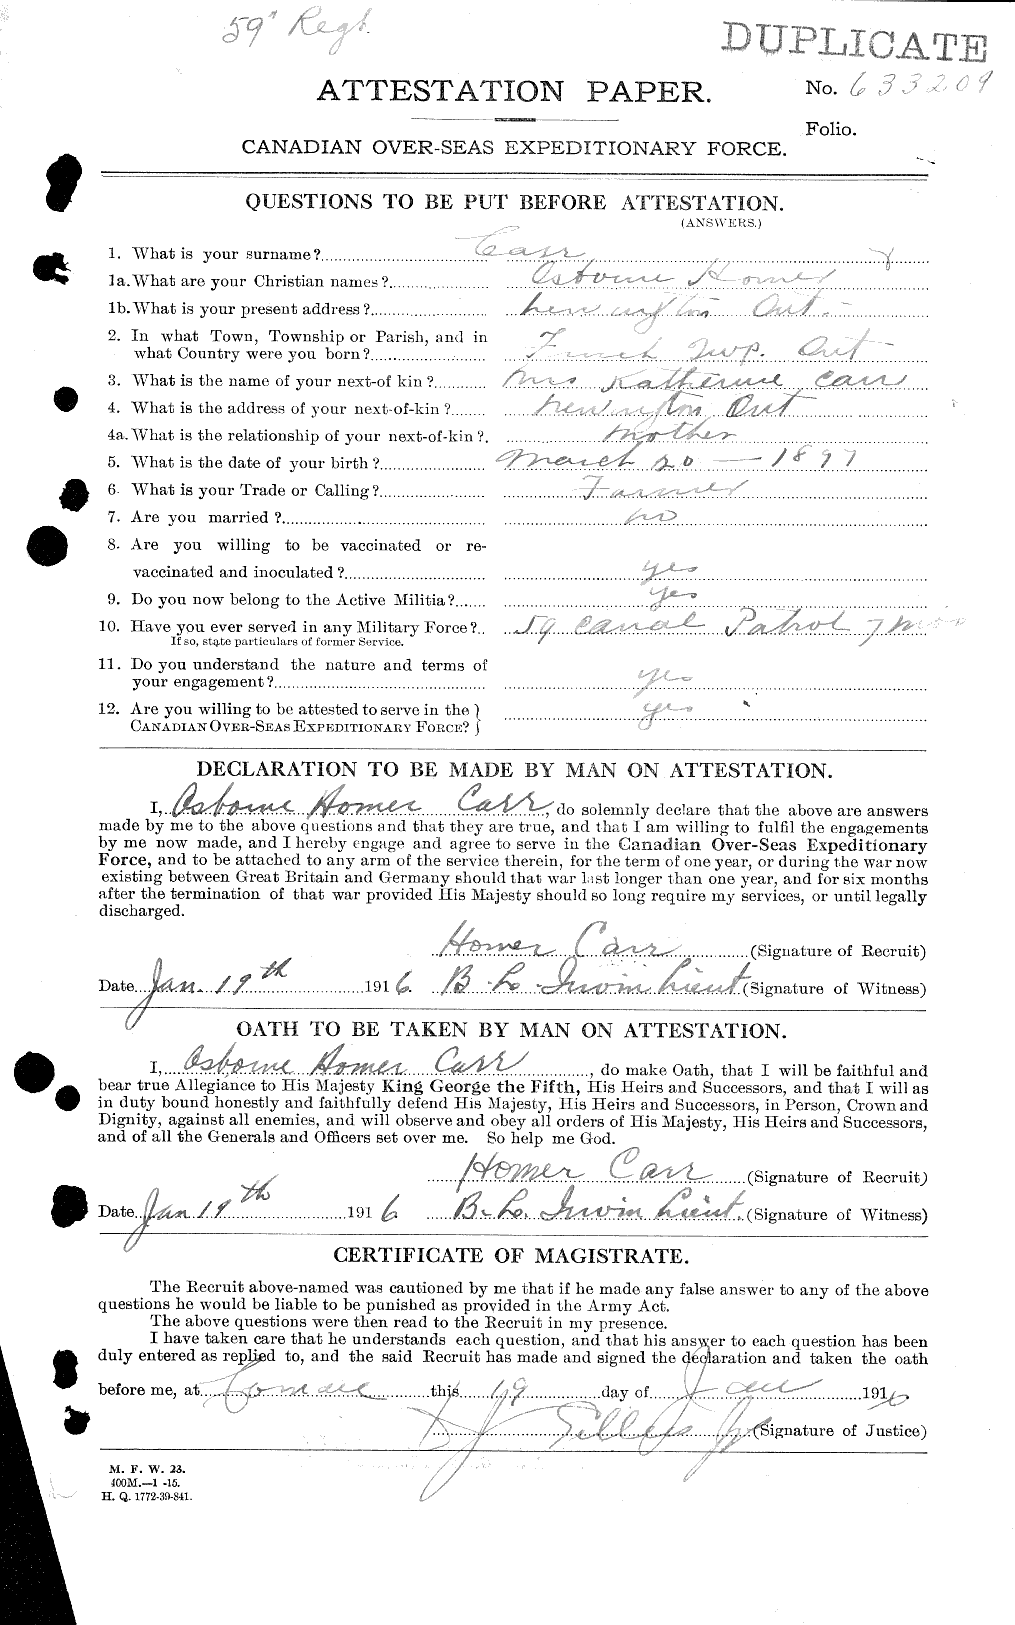 Personnel Records of the First World War - CEF 005371a